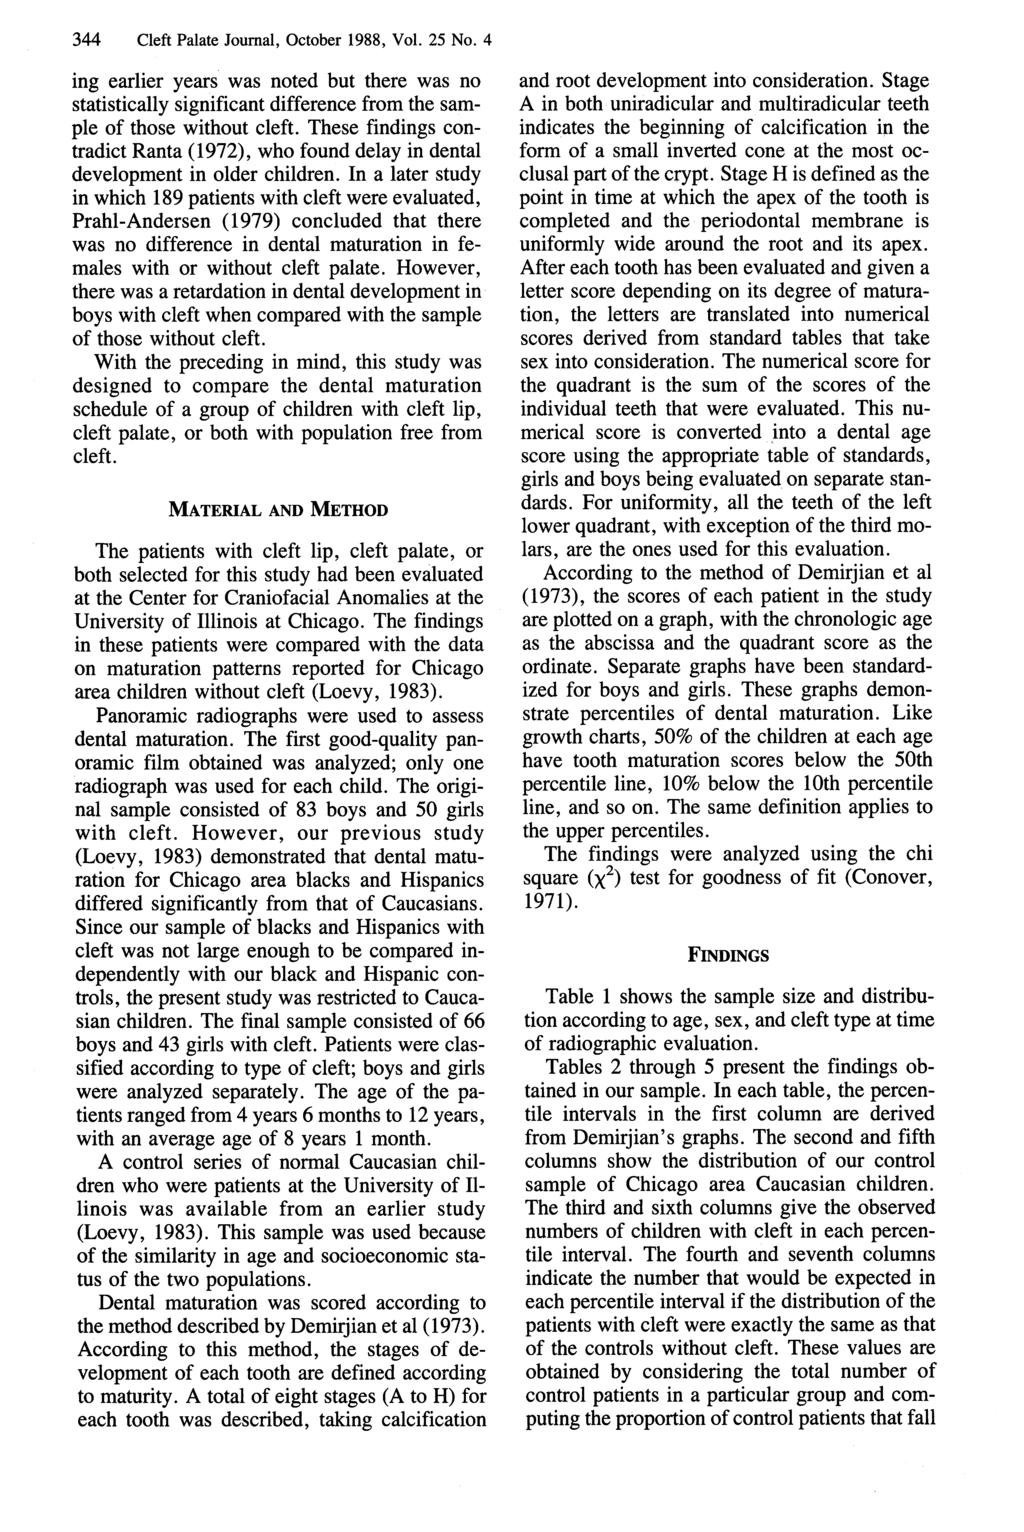 _ 344 Cleft Palate Journal, October 1988, Vol. 25 No. 4 ing earlier years was noted but there was no statistically significant difference from the sample of those without cleft.